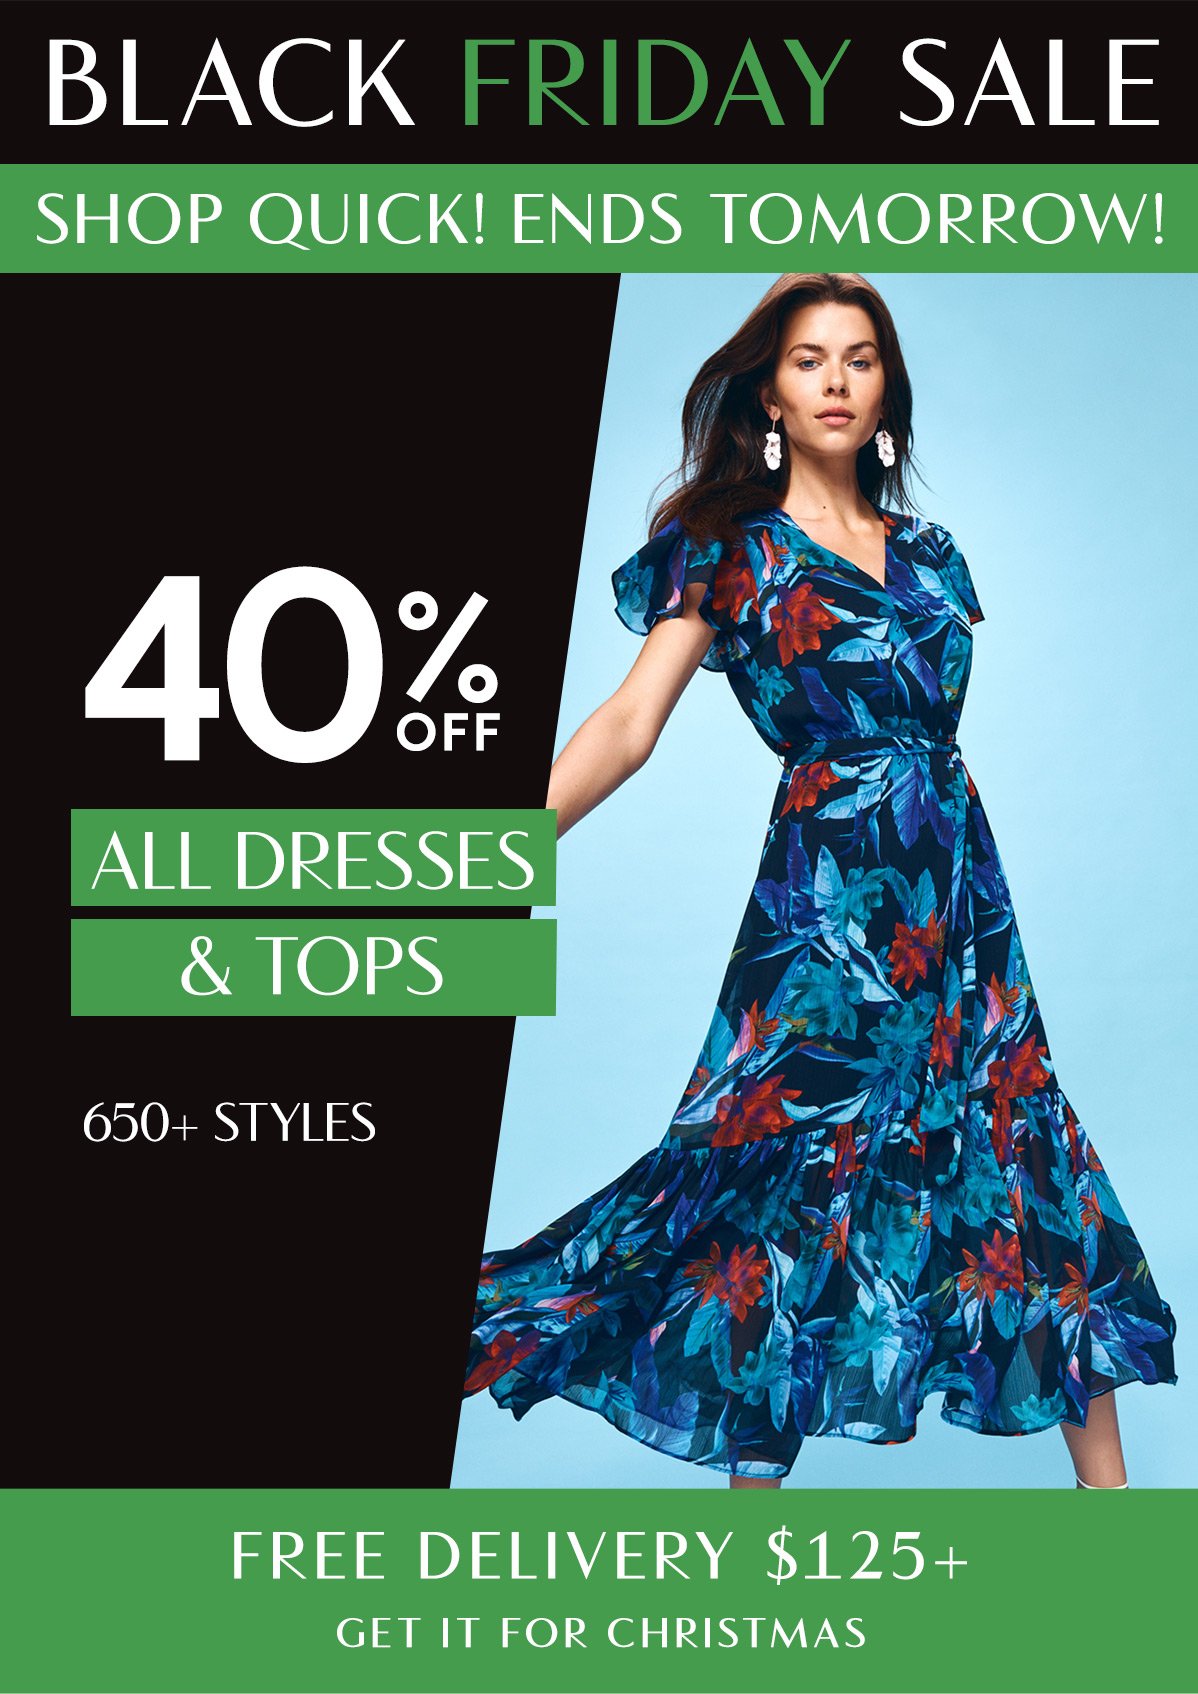 Black Friday Sale Just Got Bigger! 40% Off All Dresses & Tops. 650+ styles. Free delivery $125+. Get it for Christmas